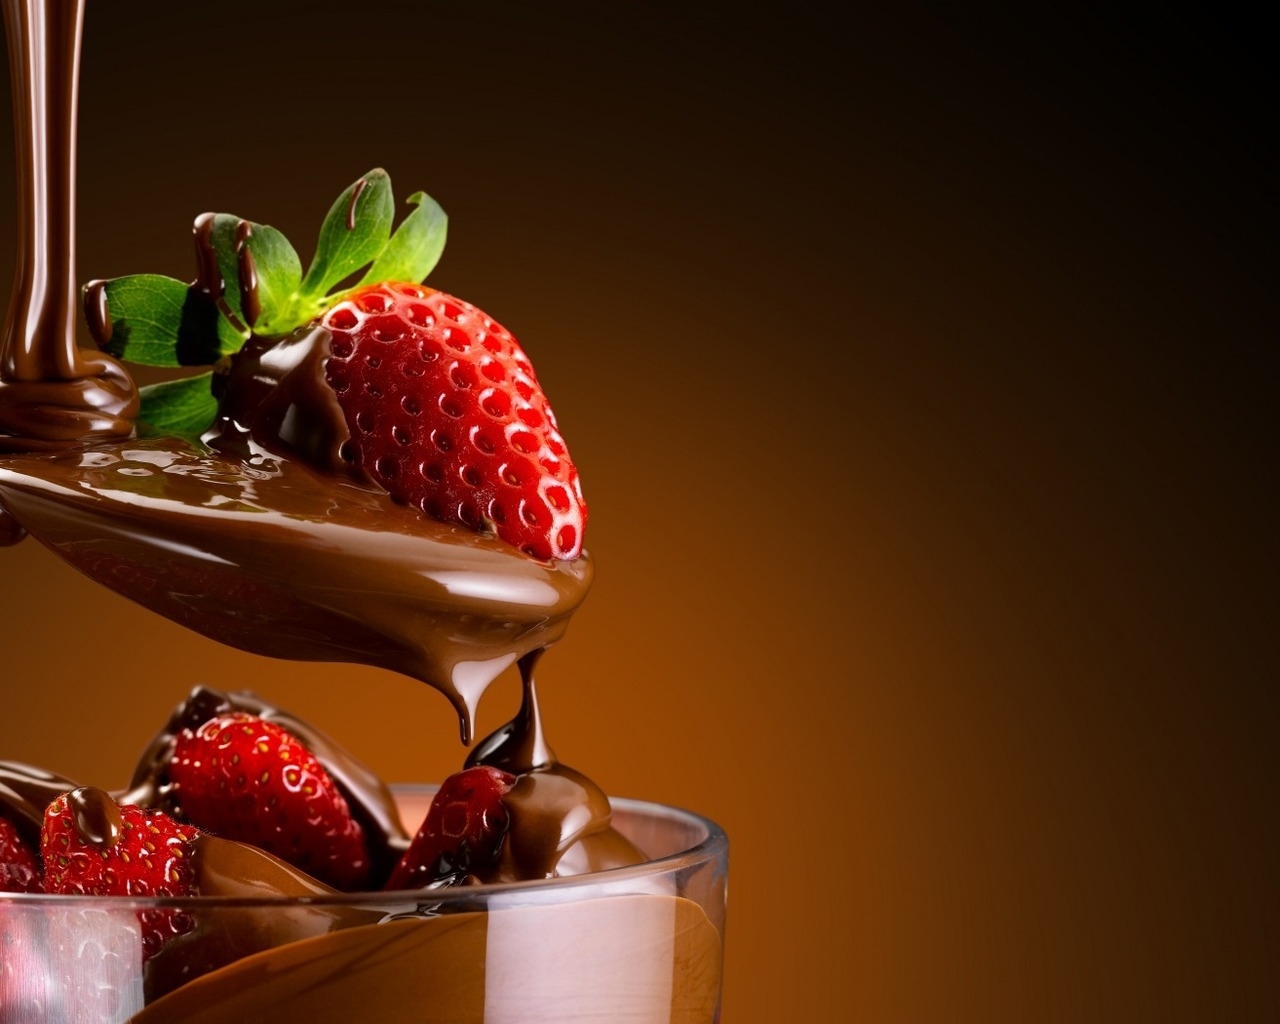 Chocolate and Strawberries Dessert for 1280 x 1024 resolution